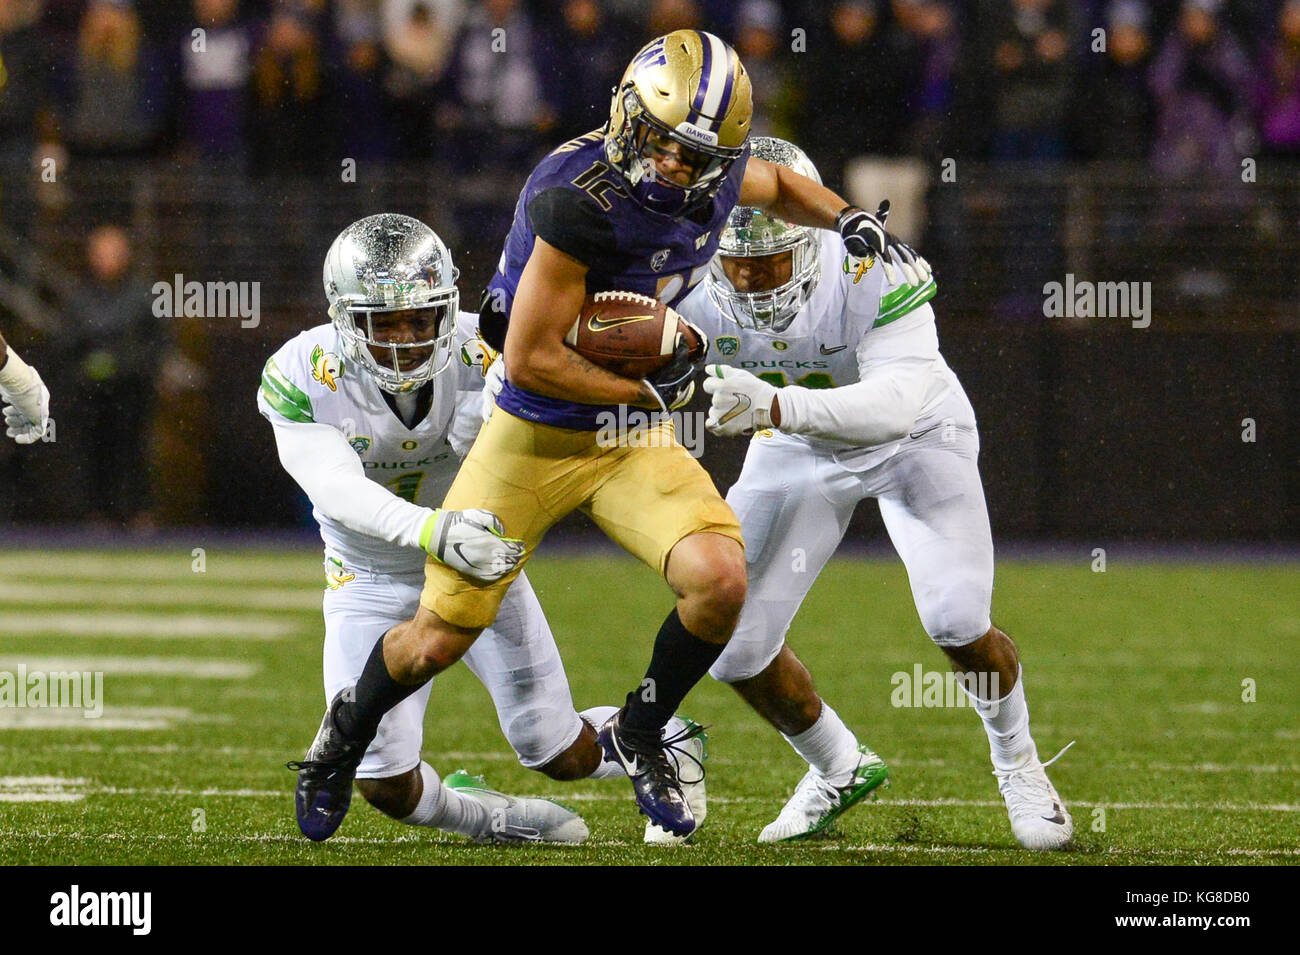 Seattle, WA, USA. 4th Nov, 2017. UW receiver Aaron Fuller (12) with the one of his 2 first half receptions in a PAC12 football game between the Oregon Ducks and the Washington Huskies. The game was played at Husky Stadium on the University of Washington campus in Seattle, WA. Jeff Halstead/CSM/Alamy Live News Stock Photo